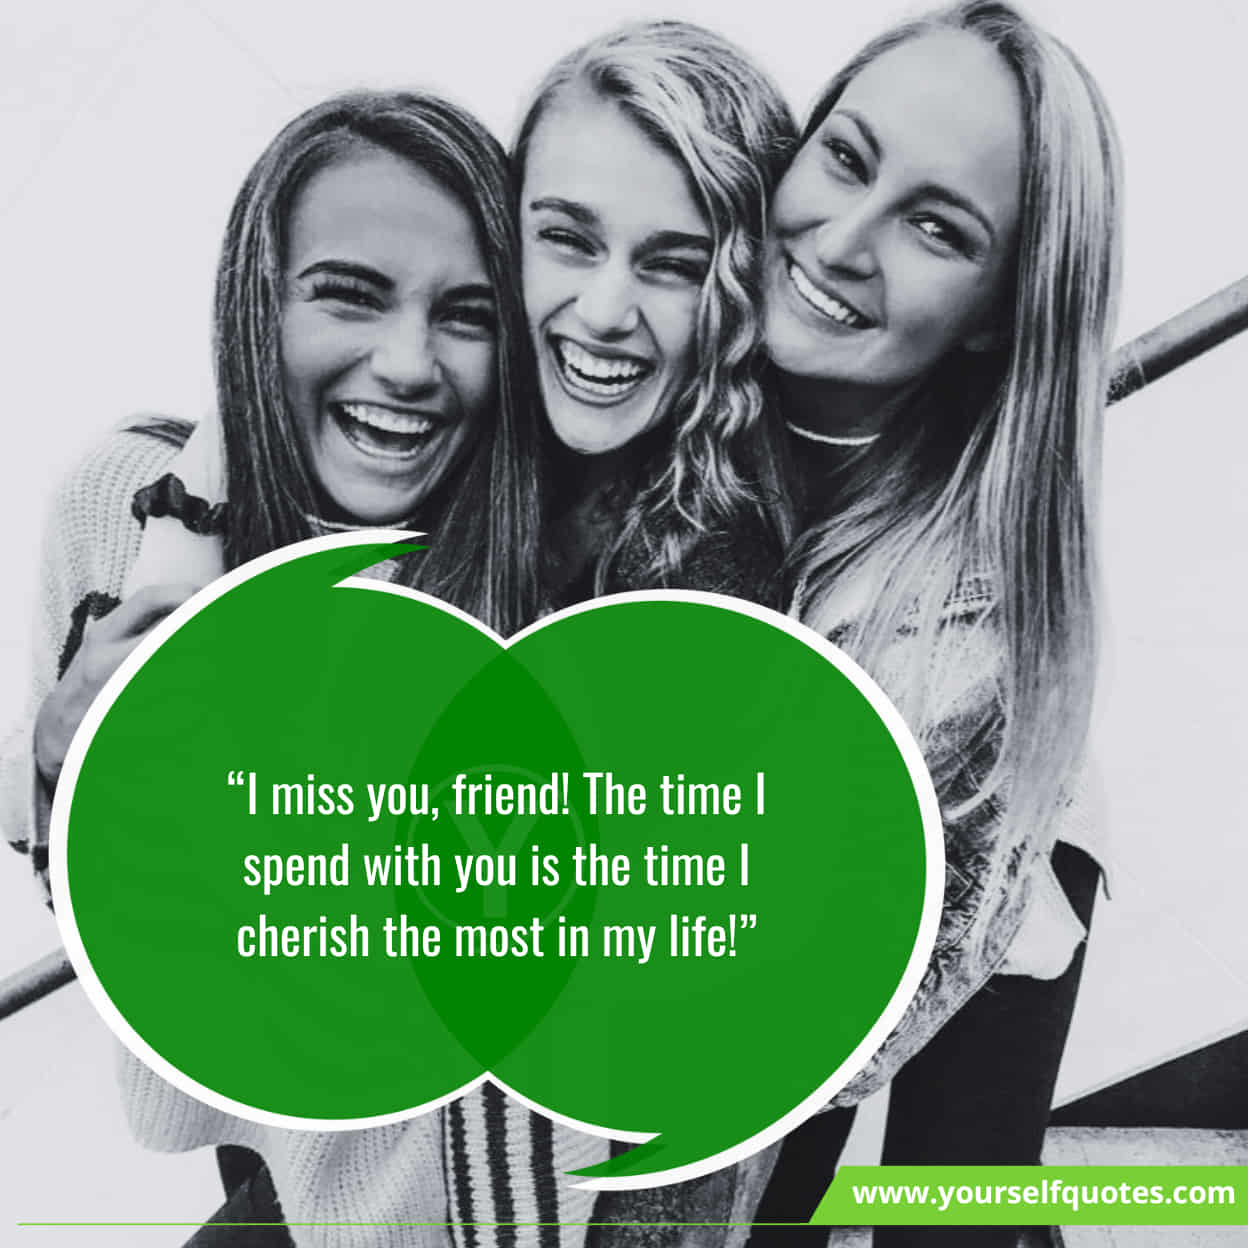 Heart-Warming Miss You Quotes for Friends